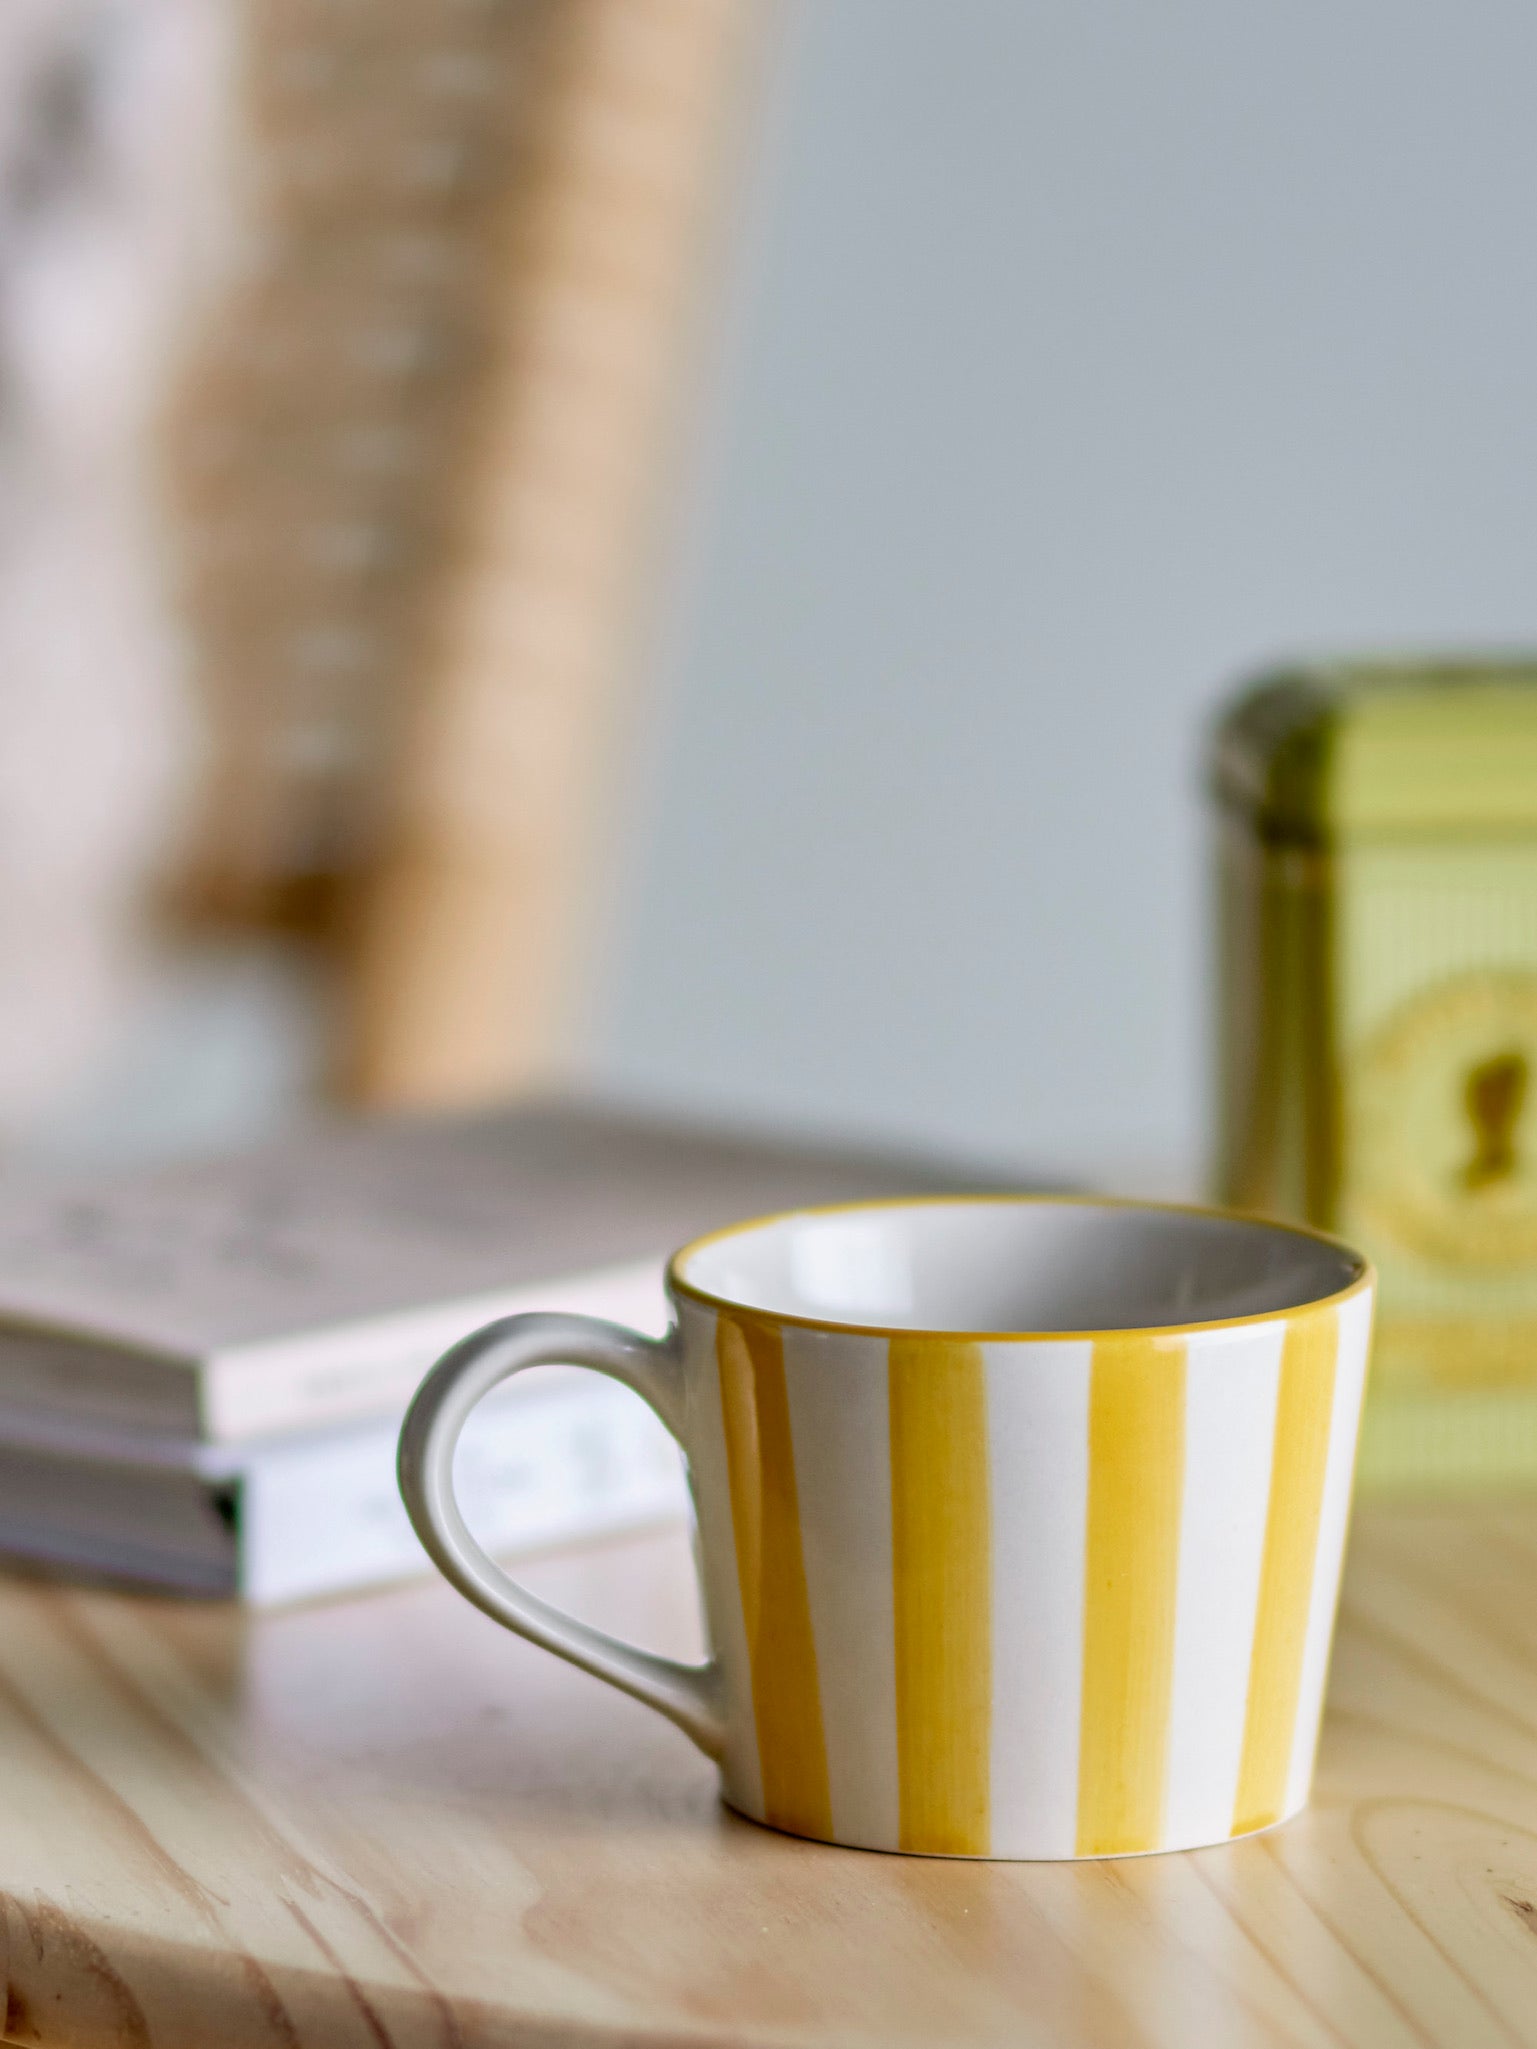 The Every Space stoneware Begonia Mug handpainted with yellow stripes by Bloomingville